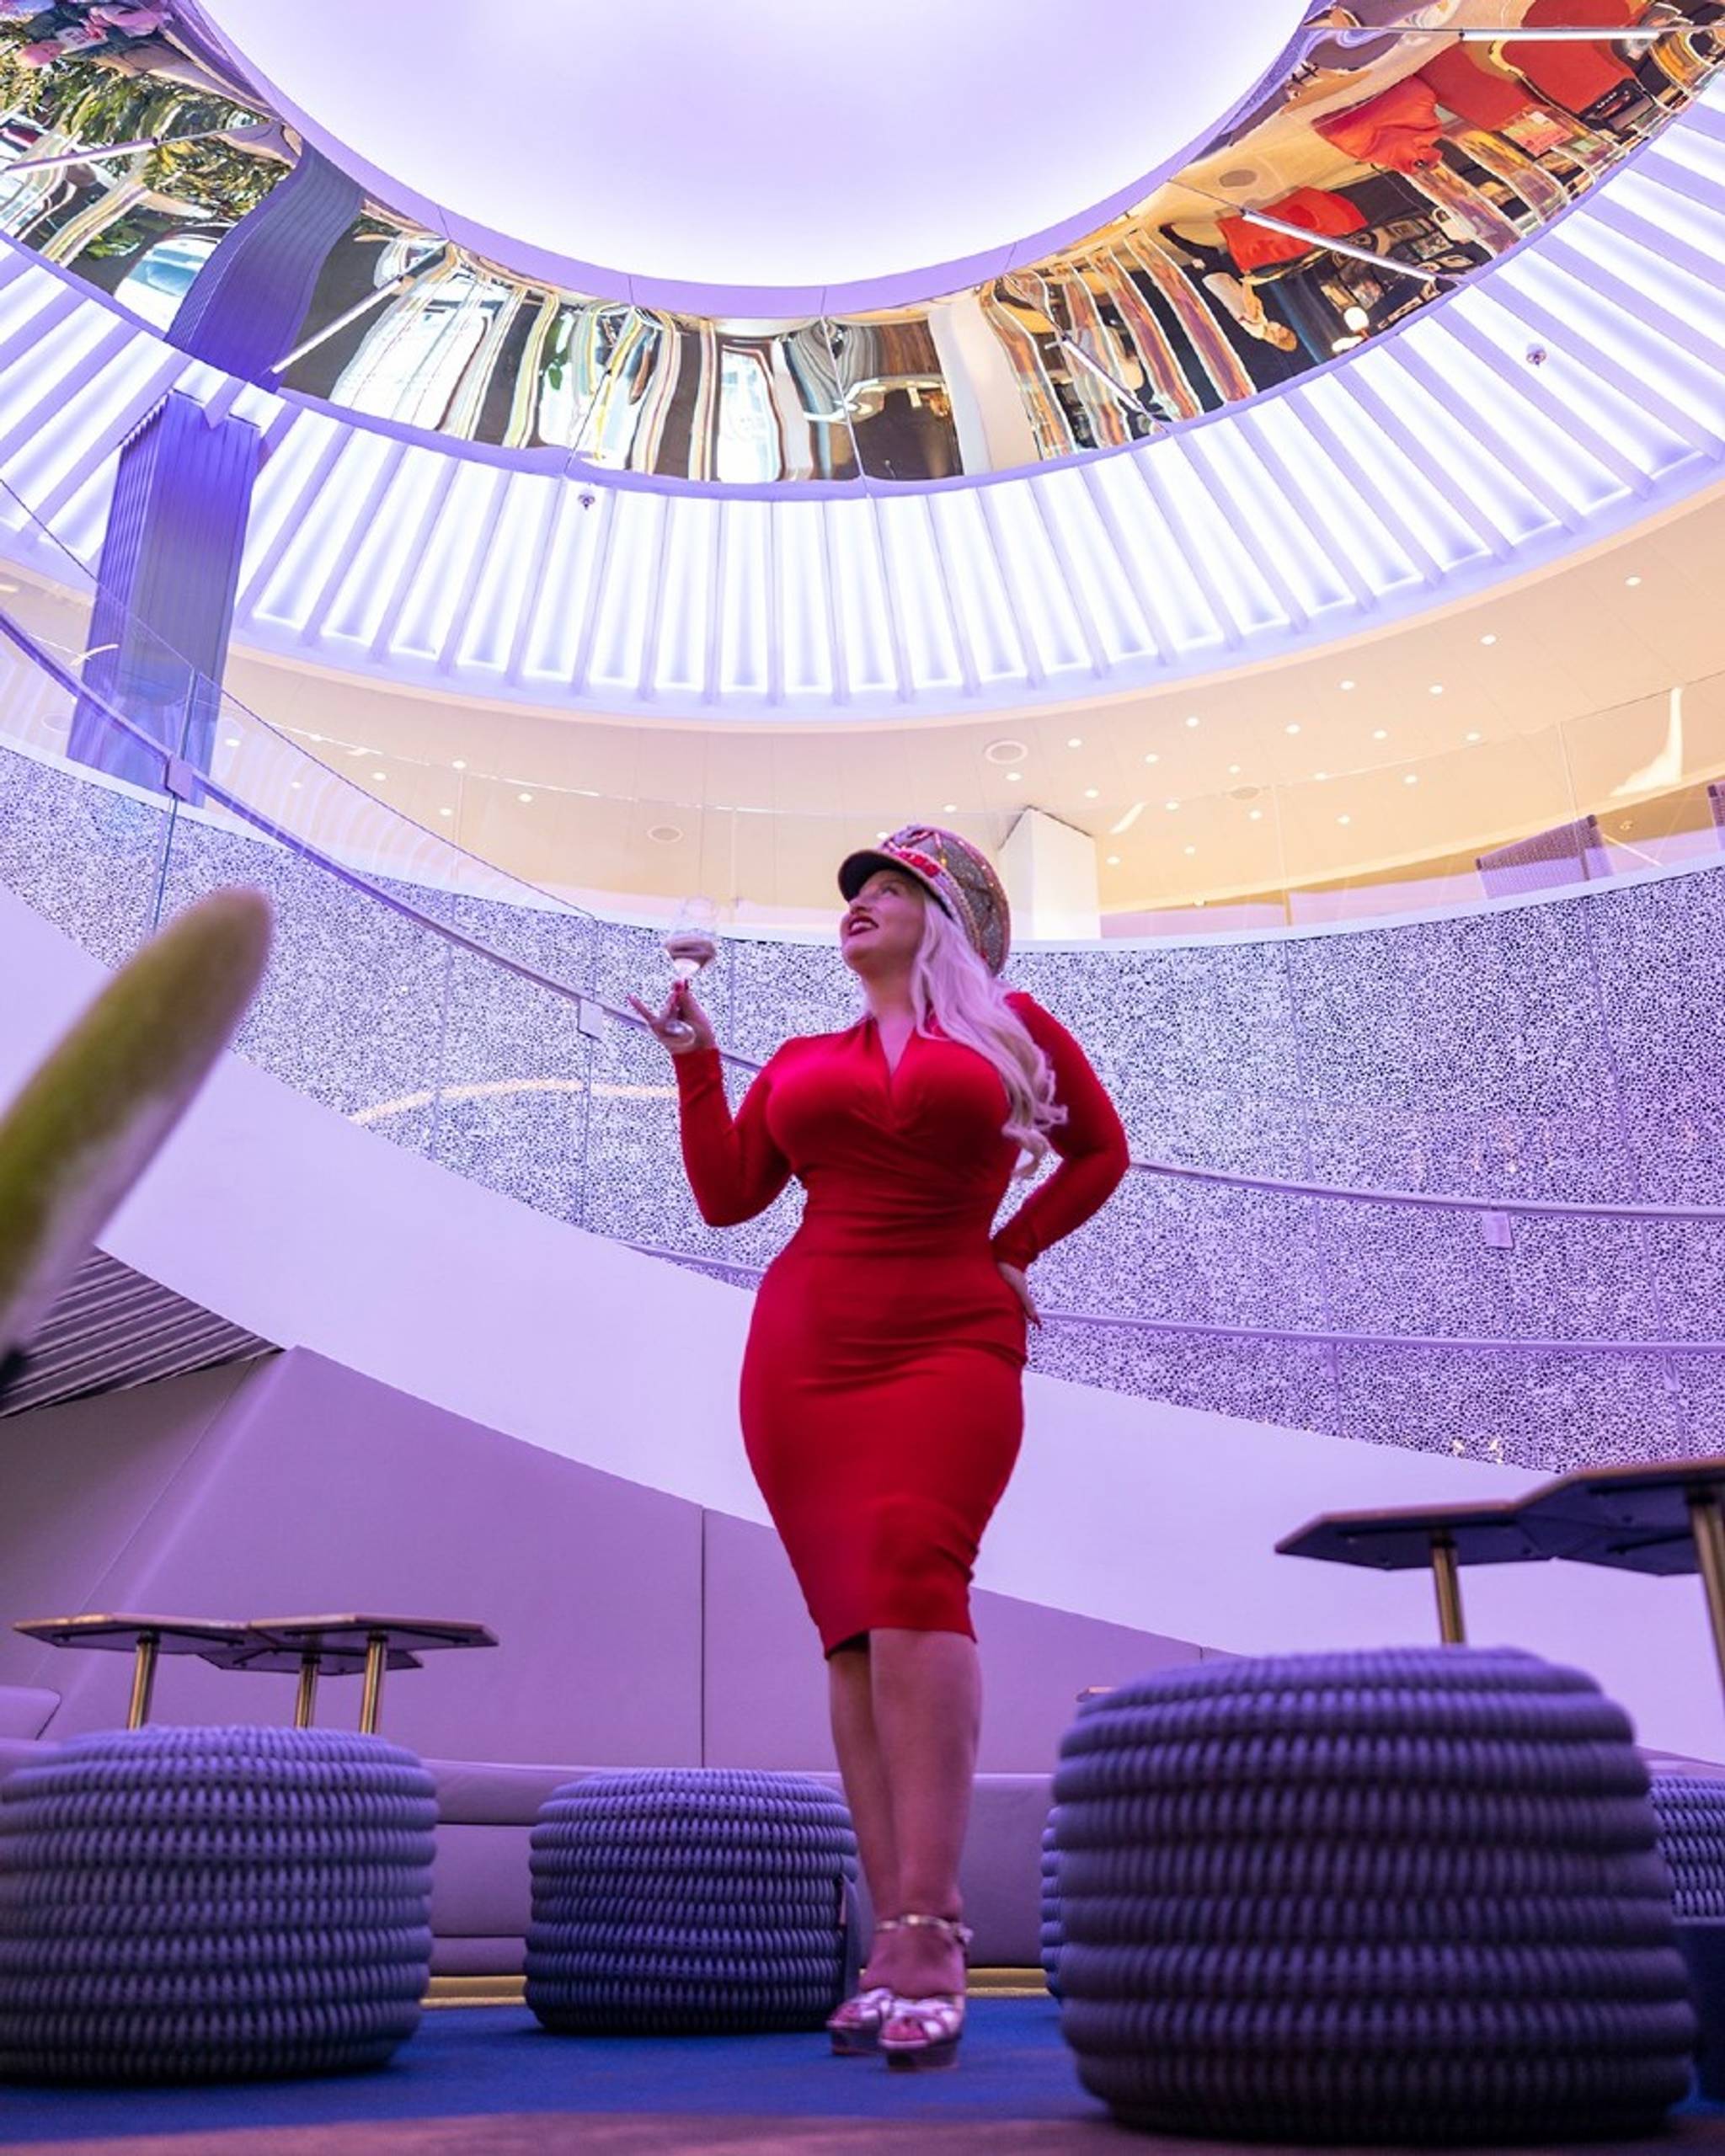 Virgin reinvents the cruise experience for Gen Yers